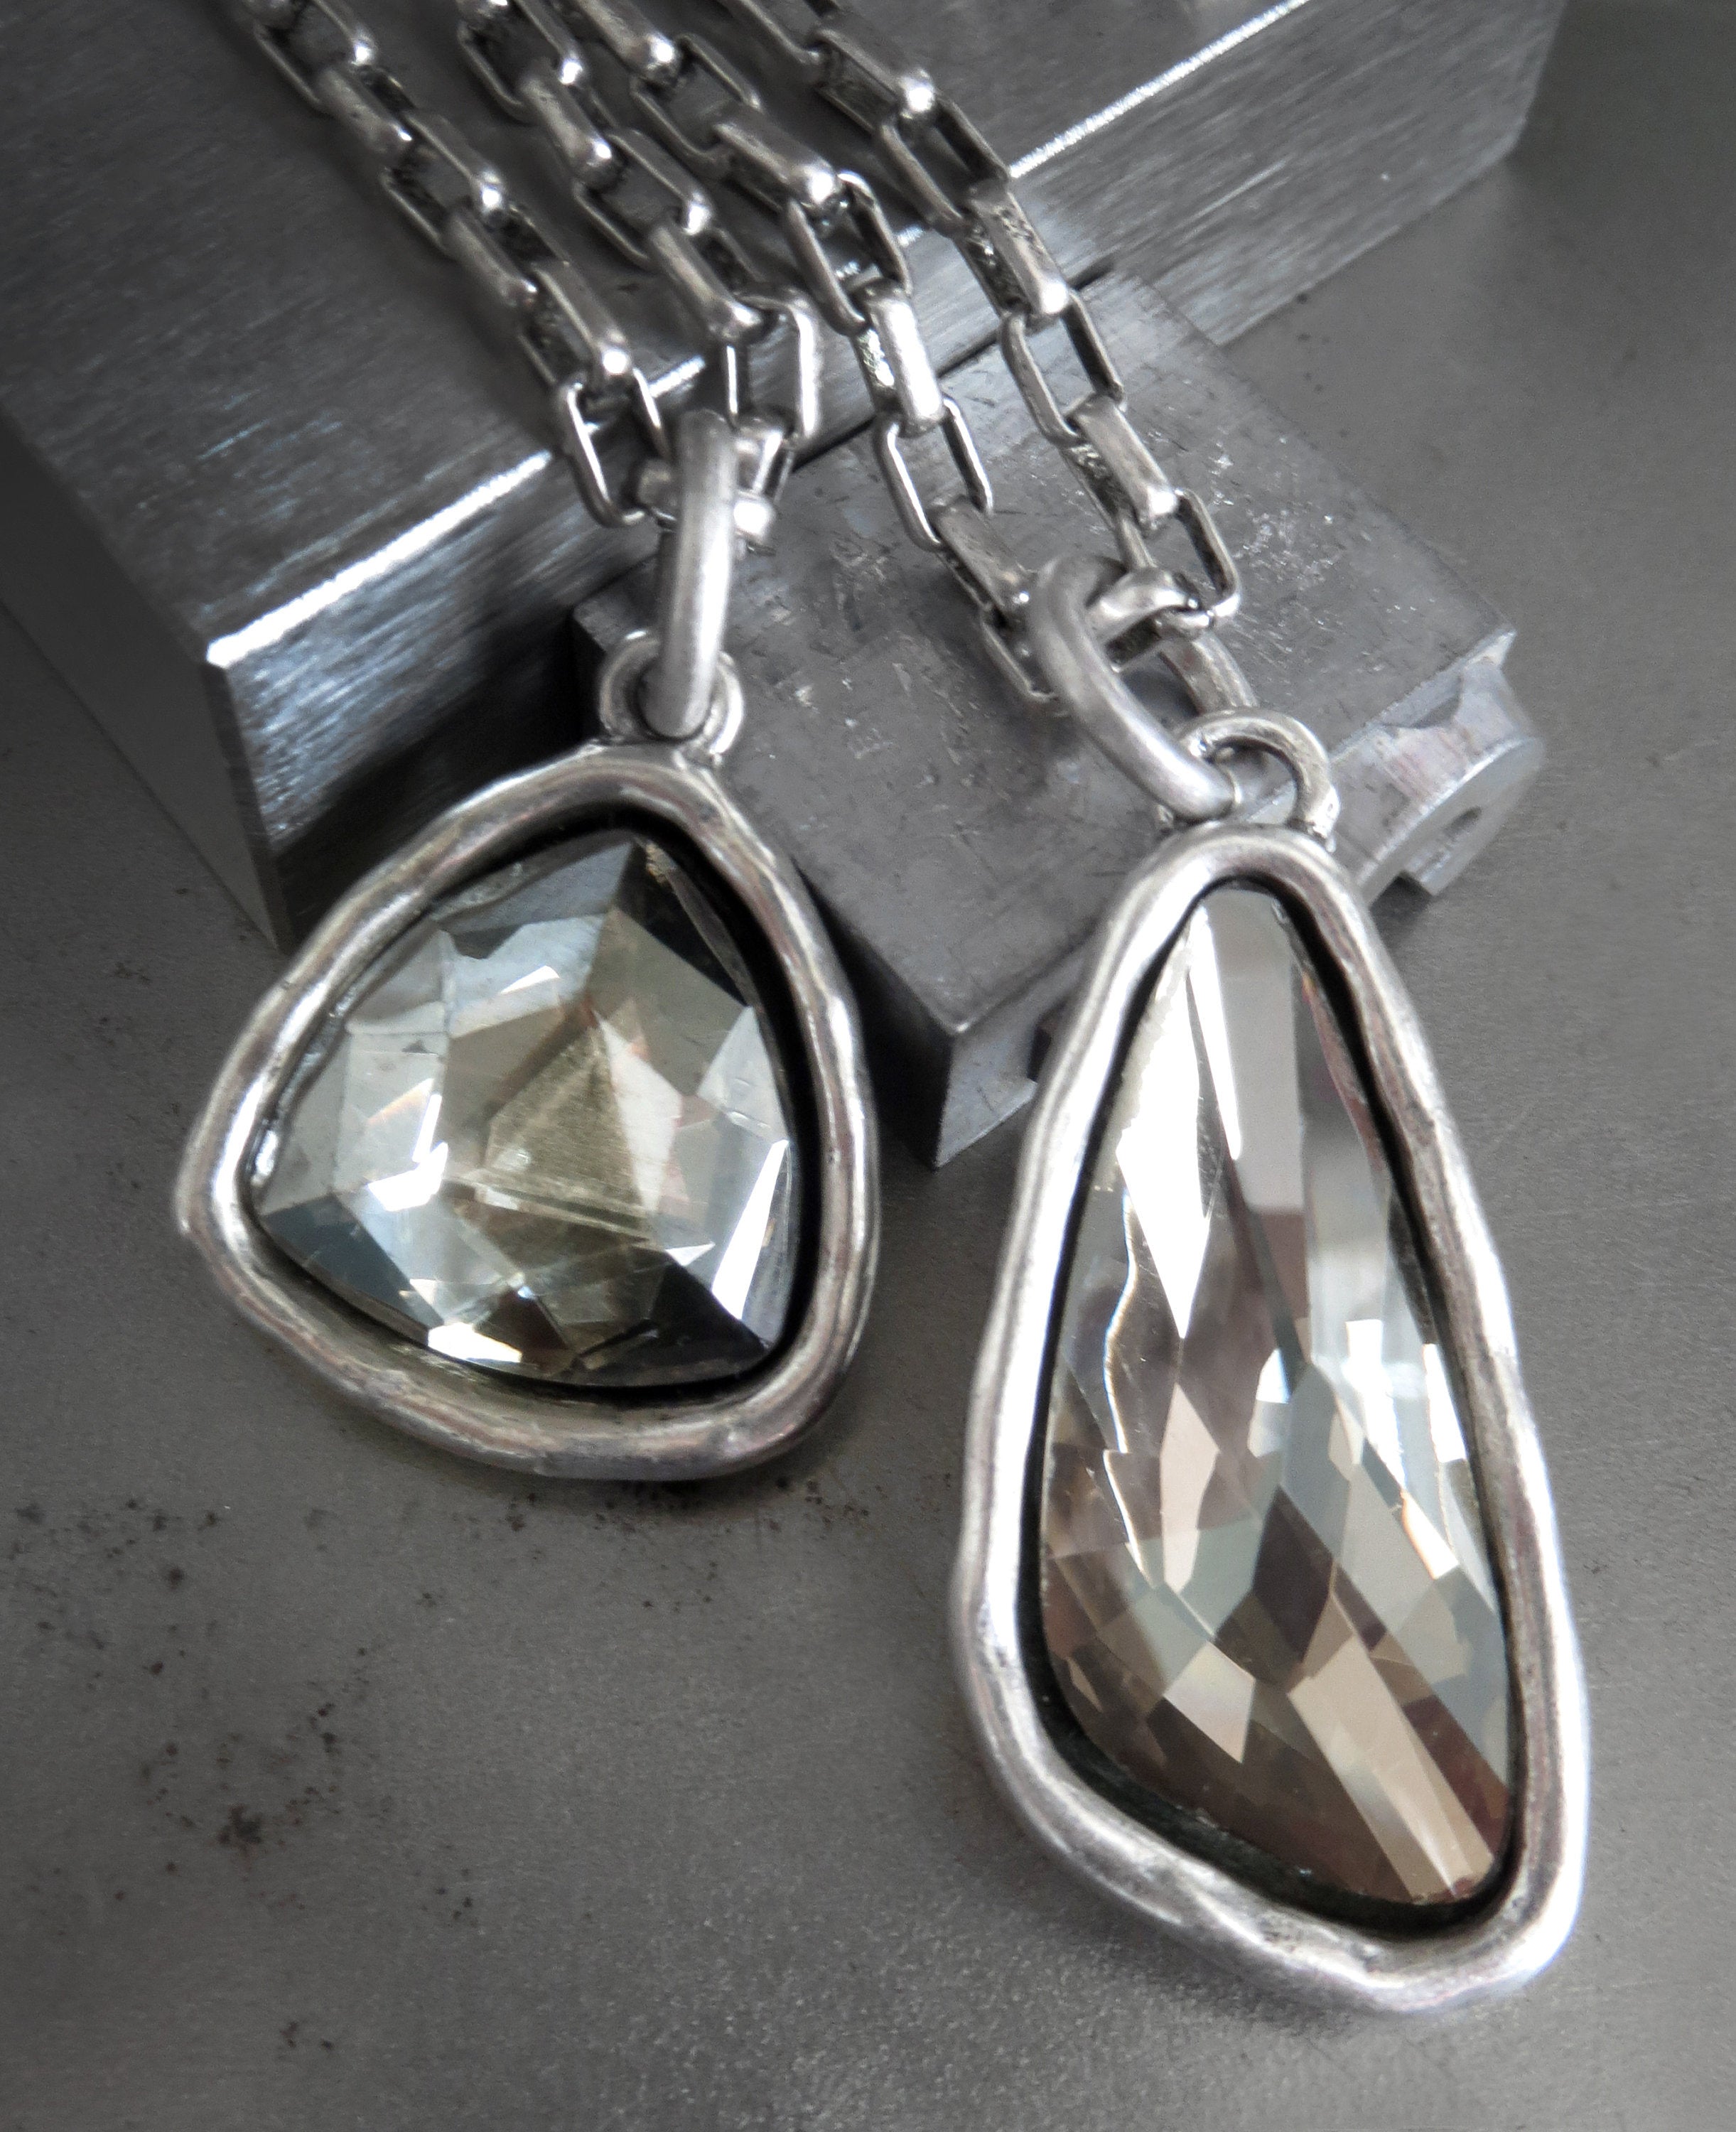 SILVER SMOKE - Faceted Glass Triangle or Wing Pendant Necklace